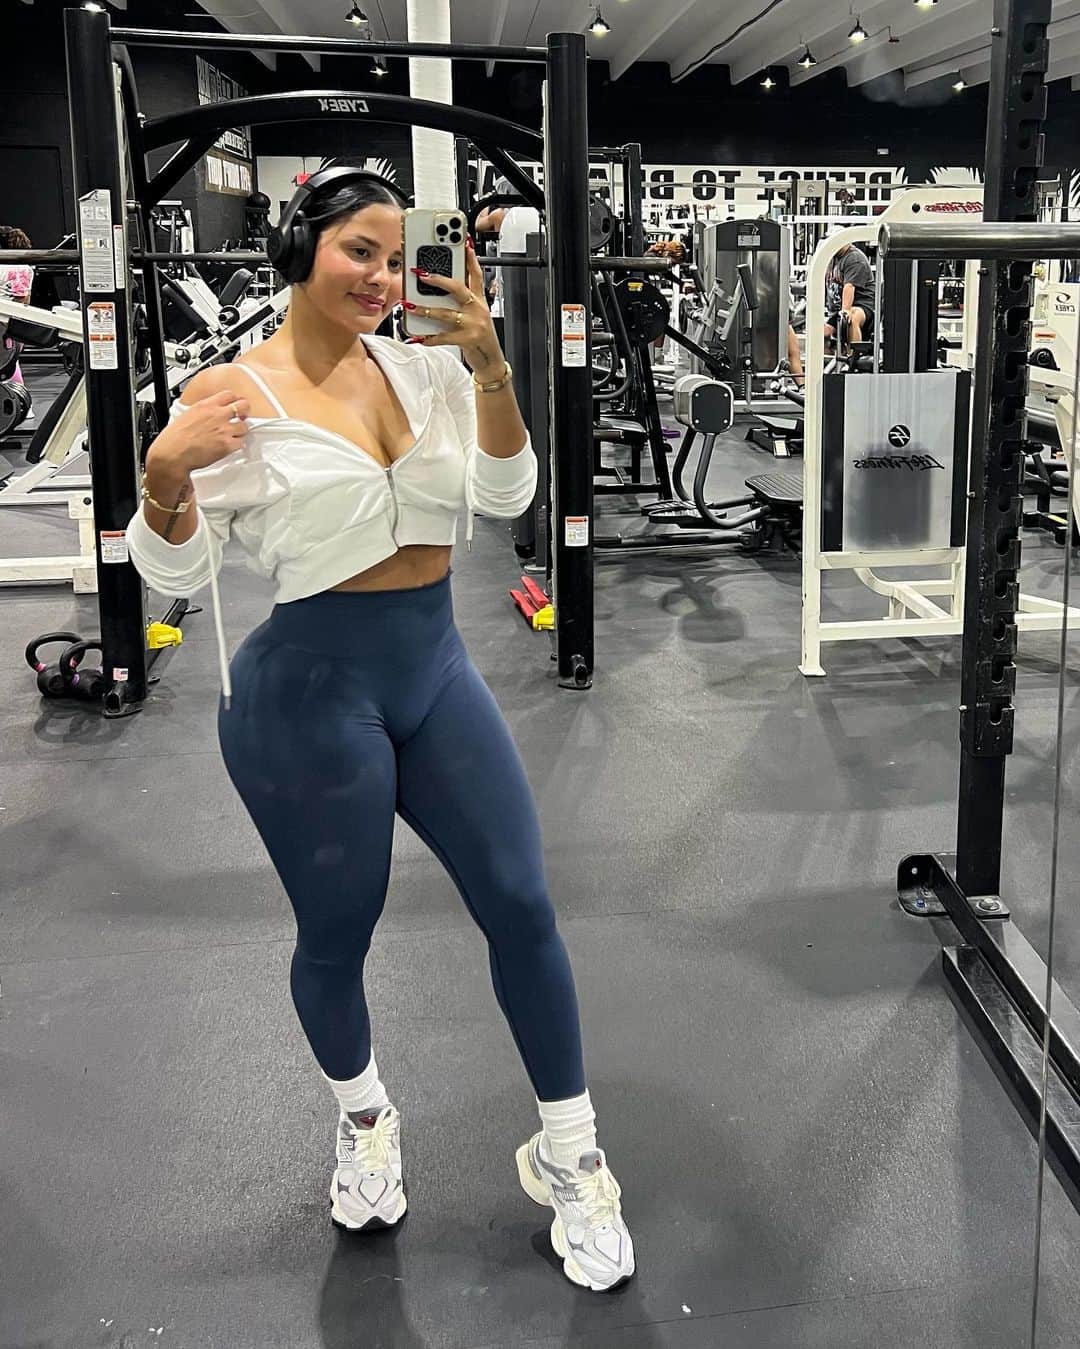 Katya Elise Henryのインスタグラム：「checkin in on my @wbkfit girlies … how we doin? 😍 we’re ending week 5 of our last challenge (8 week hourglass) ahhhhhh few more weeks!!! I still can’t believe the consistency and hard work we have been putting in for almost 6 weeks now… give yourself a big hug and a donut and and pray it goes to your booty 🤭🤍 ps make sure to check out @wbkfit 20 days of WBK deals for up to 70% off apparel and gear that’s perfect for this next challenge coming up. Get excited 😈」